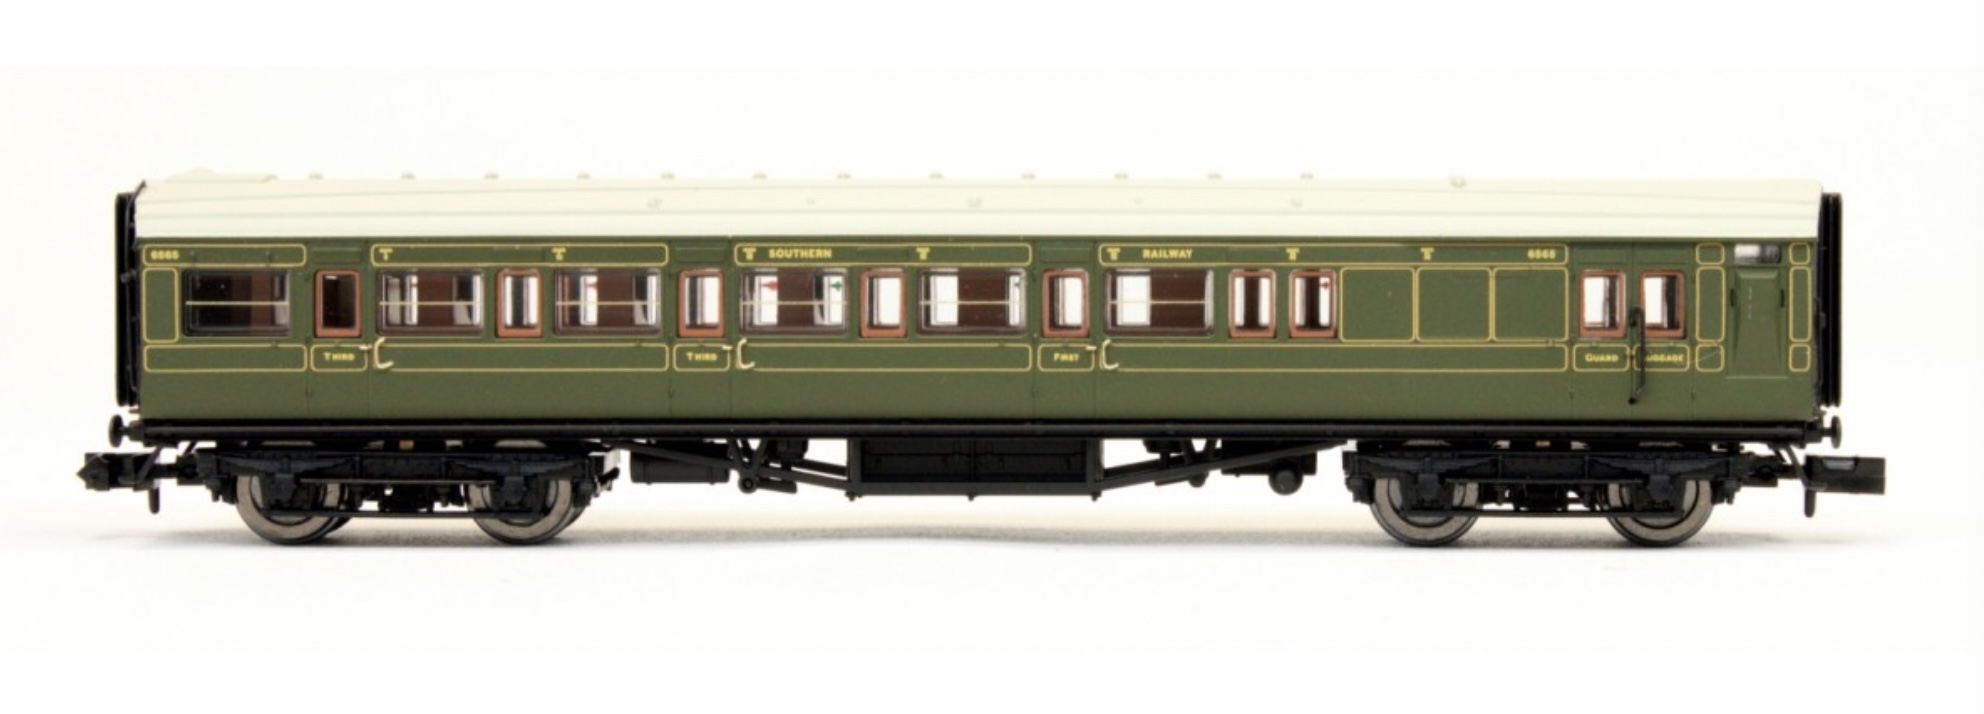 N Scale - Dapol - 2P-012-075 - Passenger Car, Coach, Maunsell, Composite - Southern (UK) - 6565